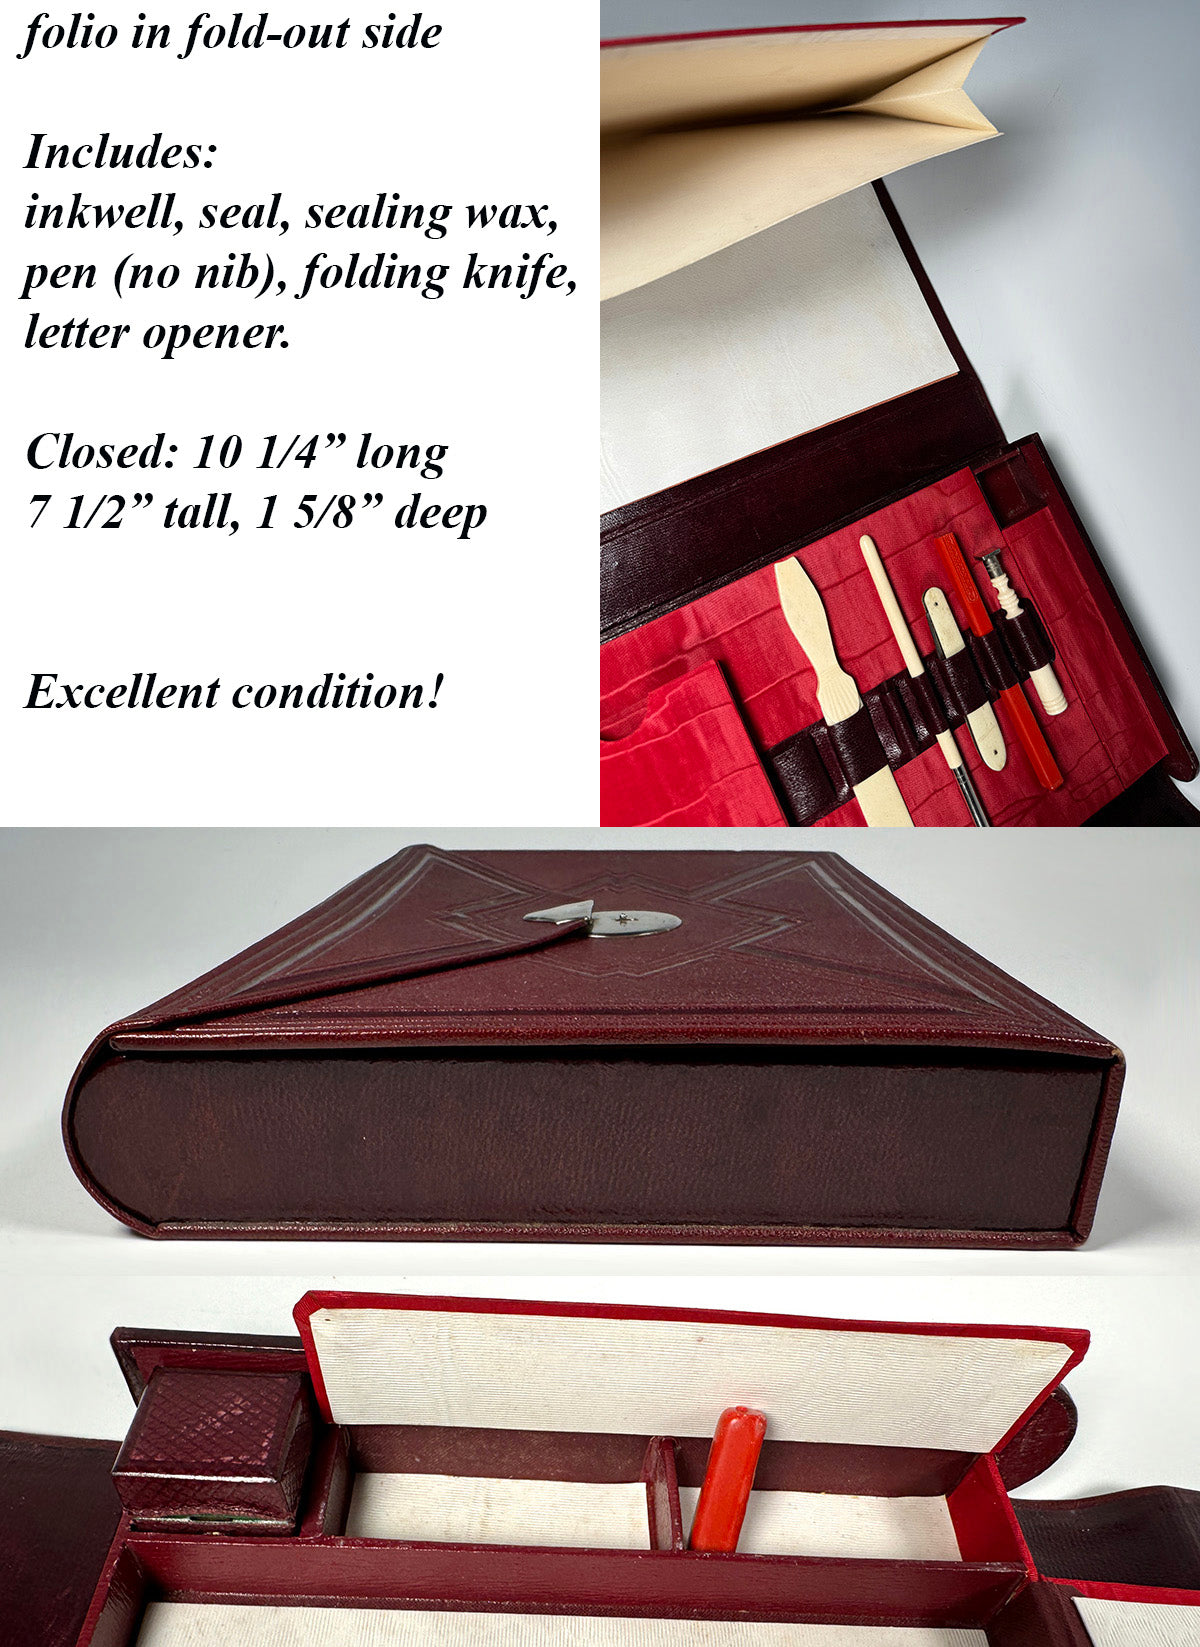 Antique French Writer's Folio, Case, Etui and Ivory Pen, Wax Seal, Pocket Knife, Letter Opener, Inkwell